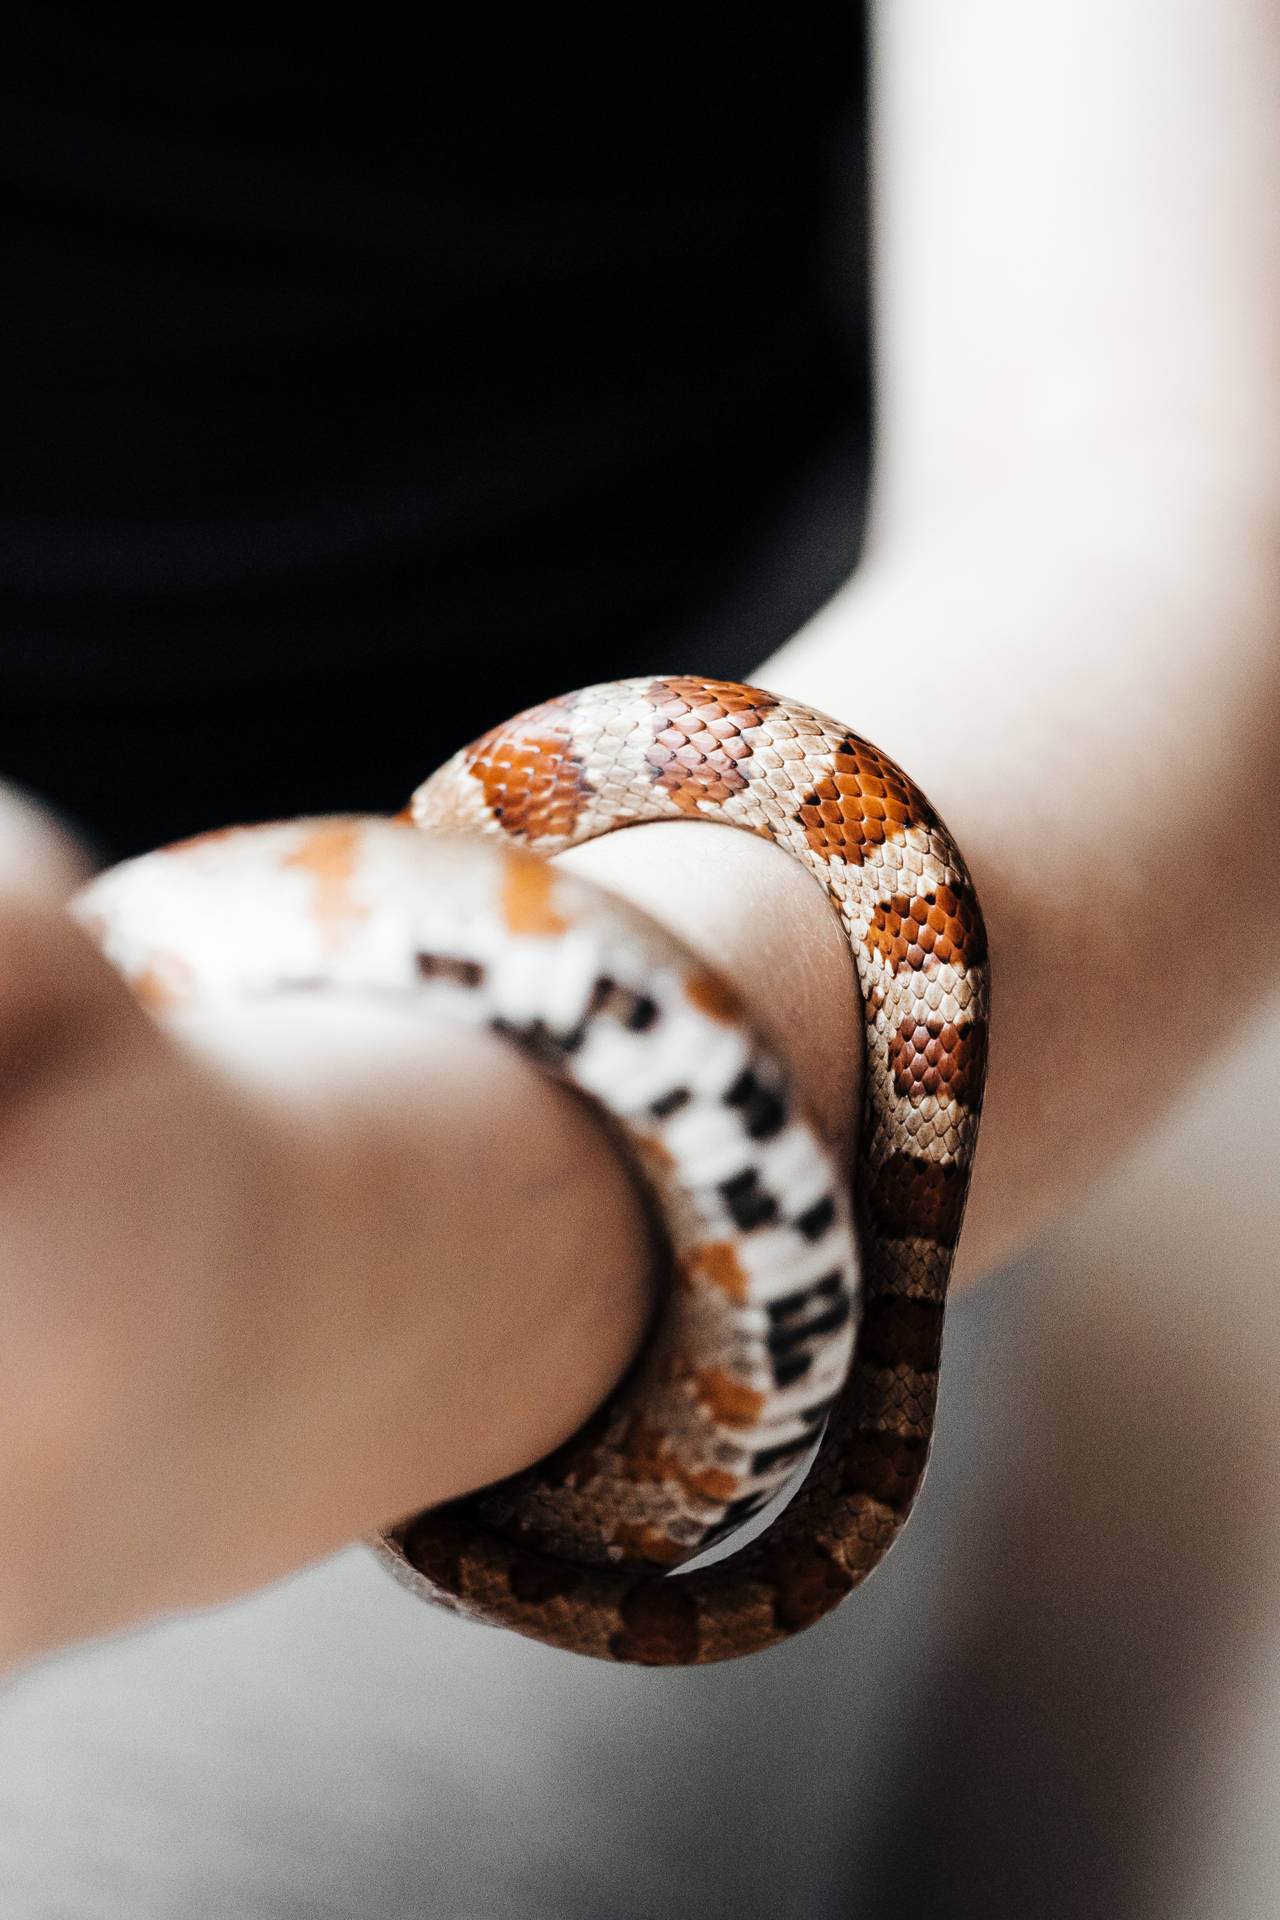 Snakes Wrapping Arm Awesome Animal Wallpaper